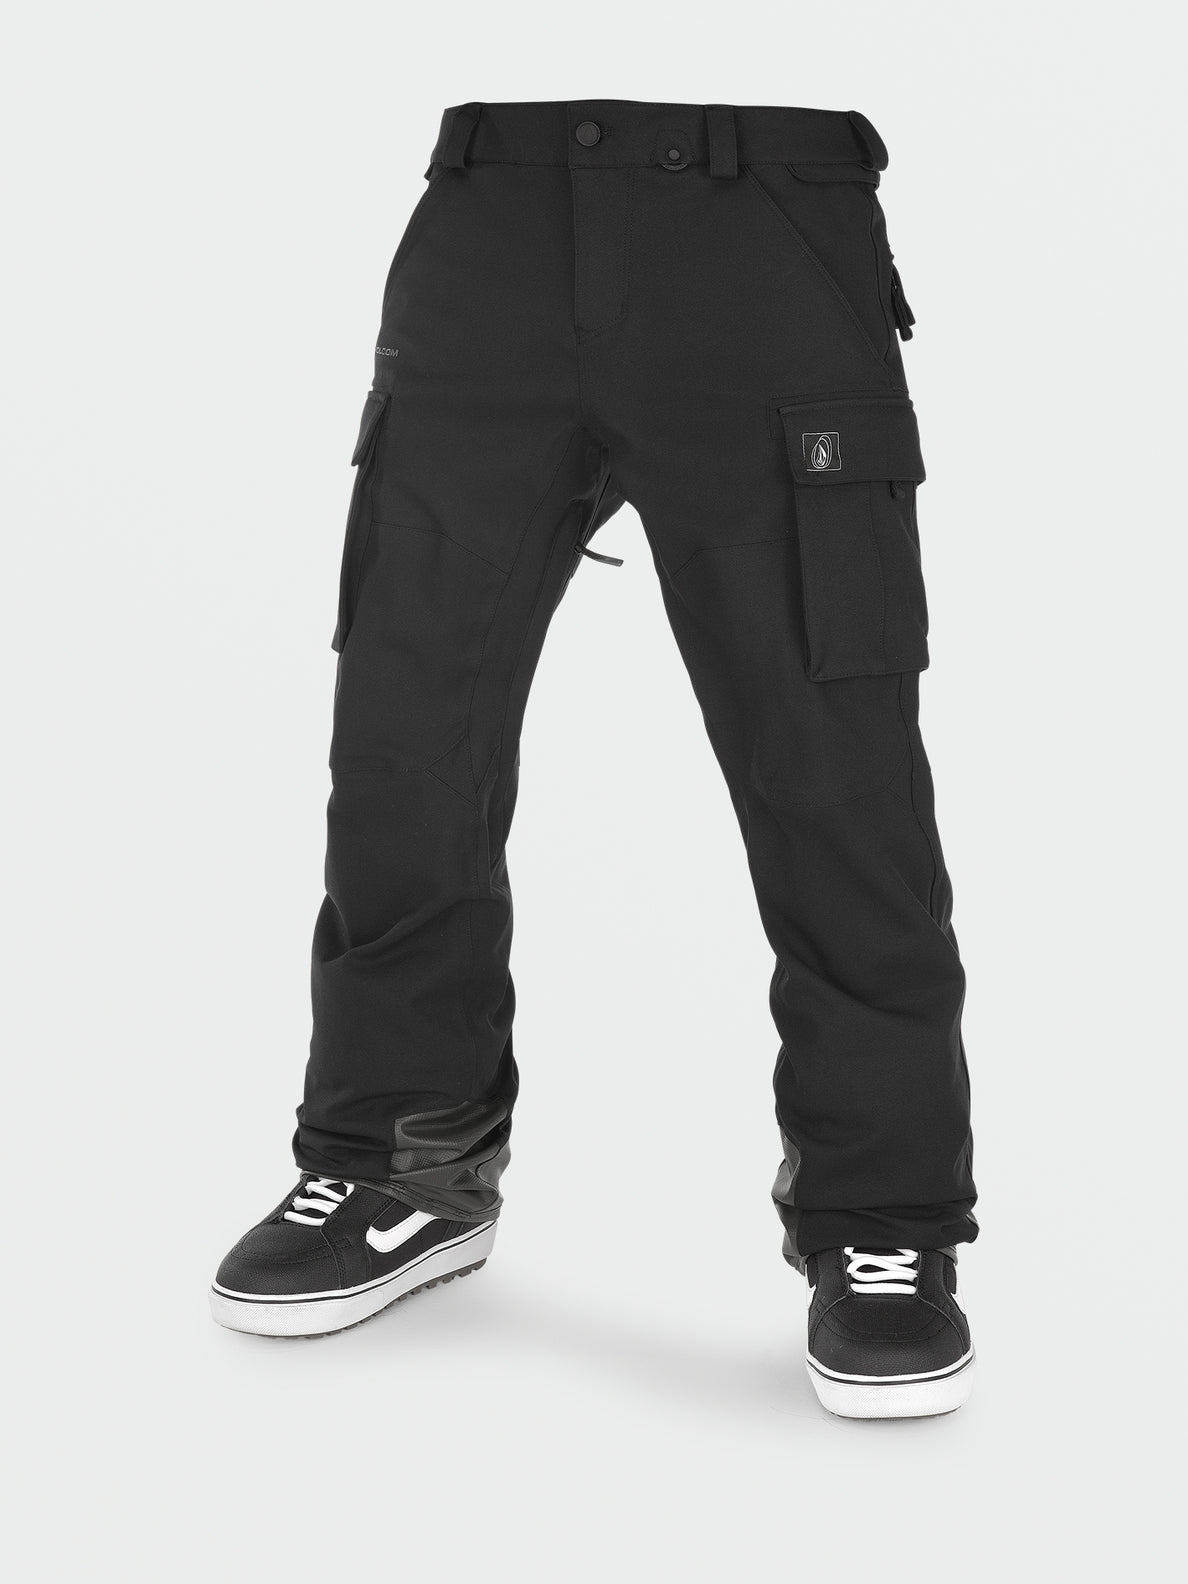 Men's New Articulated Pant